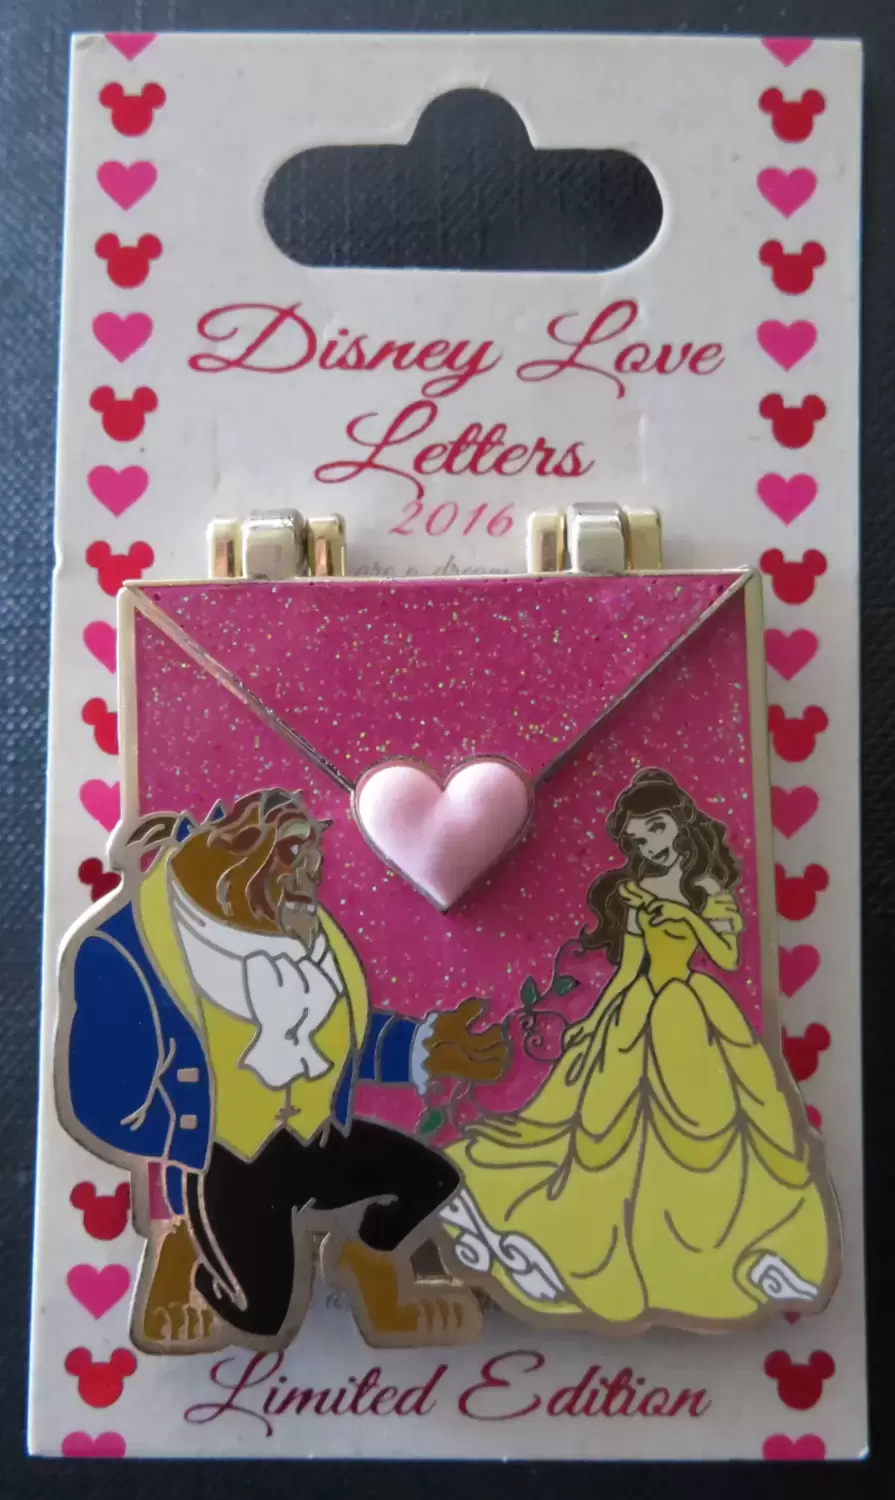 Disney Love Letters 2016 - Disney Love Letters 2016 - Beauty and the Beast